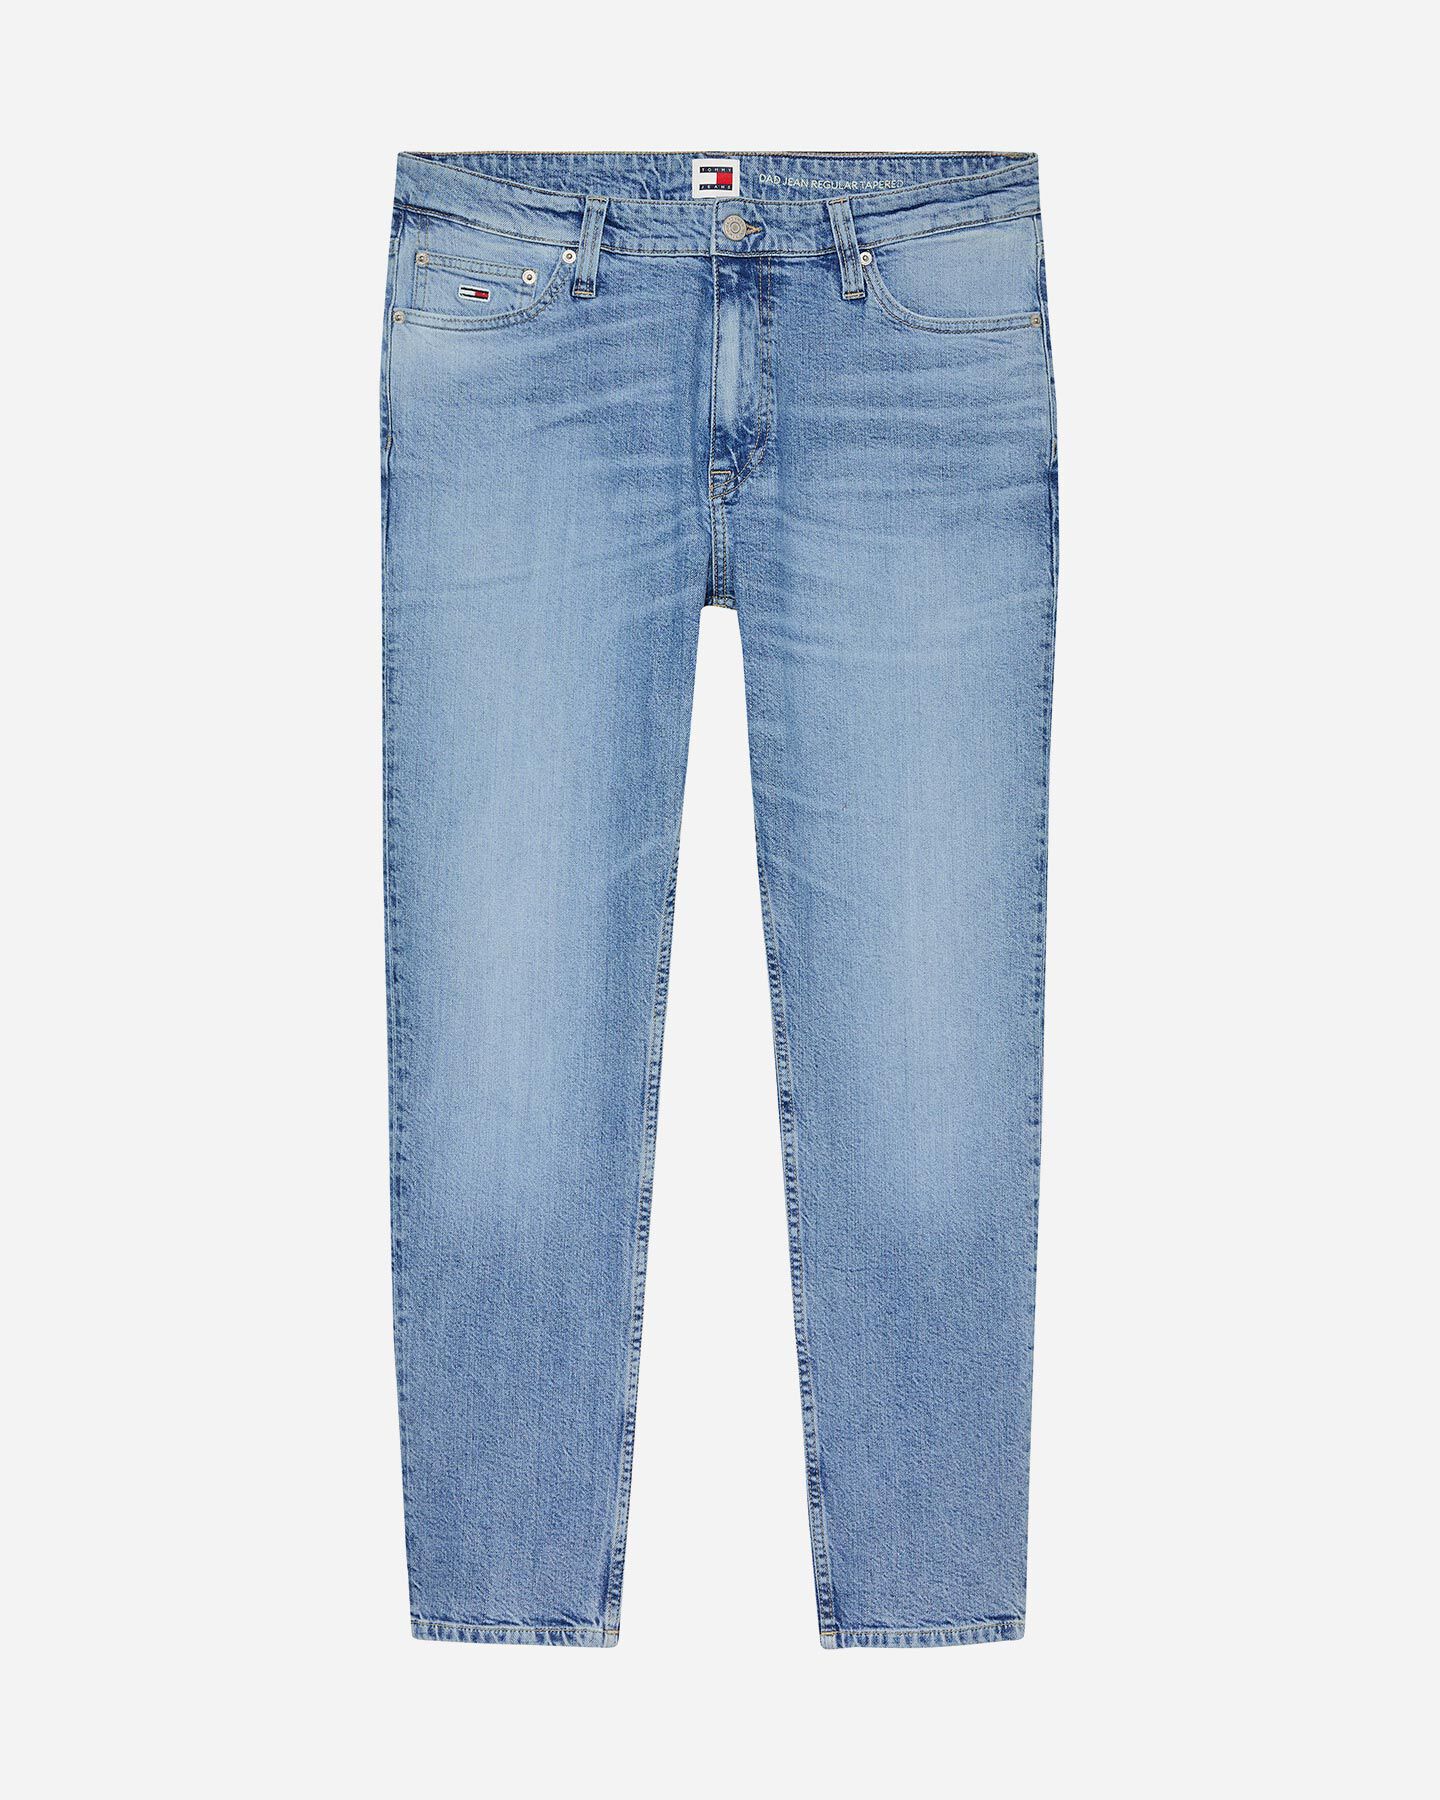  Jeans TOMMY HILFIGER DAD TAPERED M S5686197|UNI|32/33 scatto 0